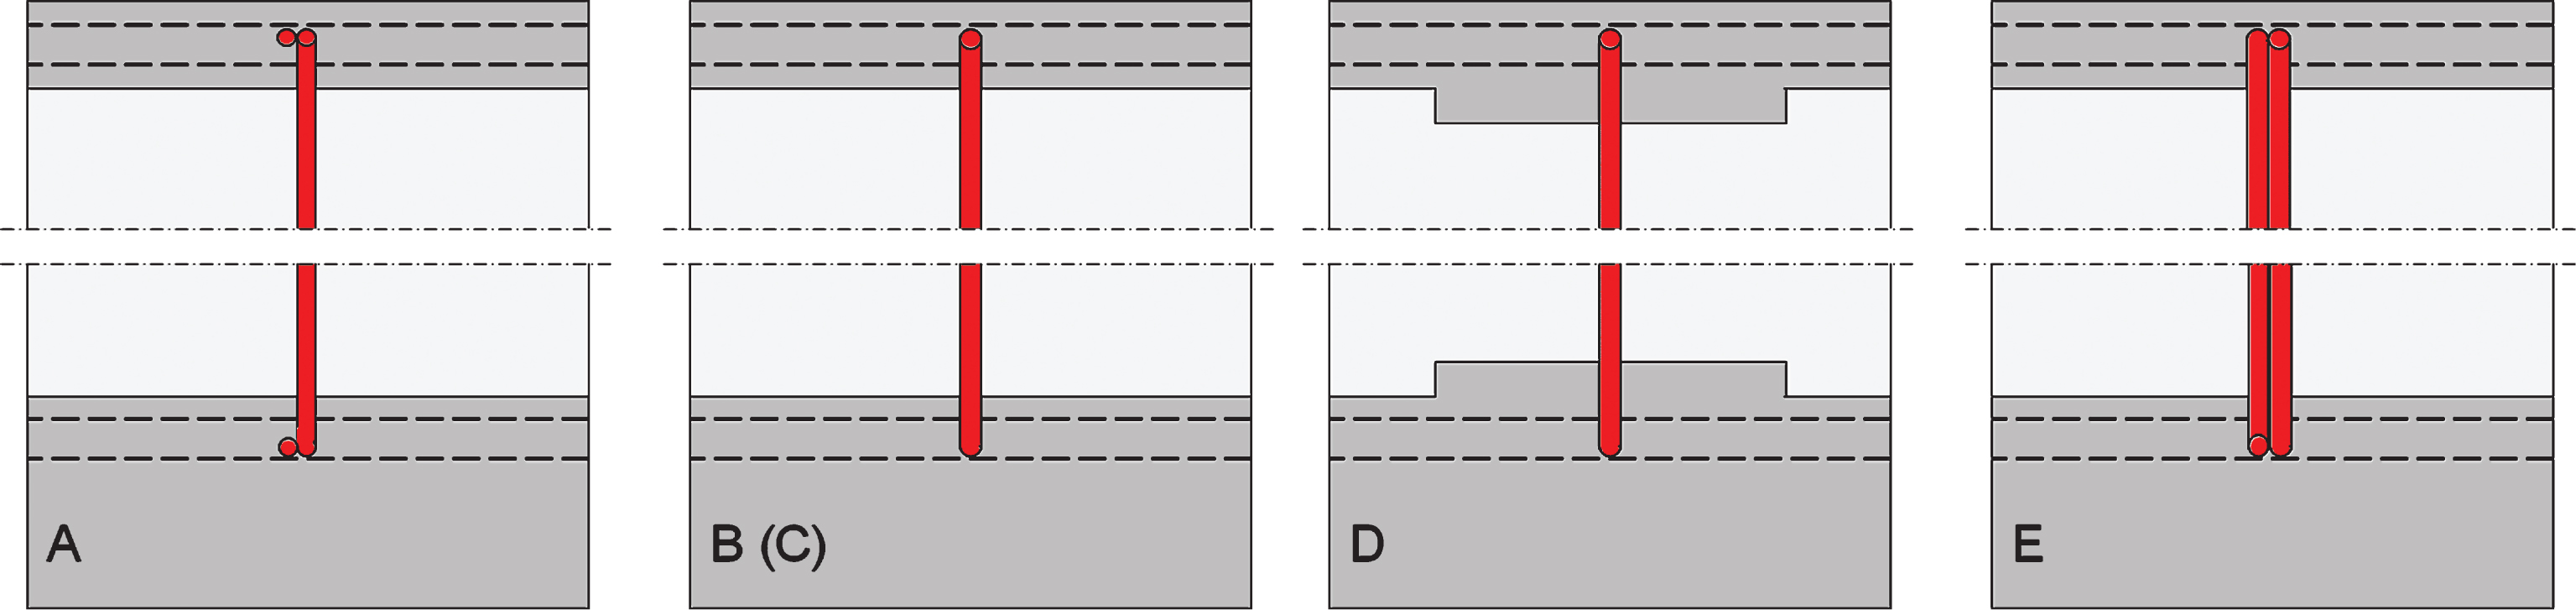 Schematic illustrations of the different configurations: steel connector (A); GFRP connector (B, C); GFRP connector with build-up panel (D); double GFRP connector (E).